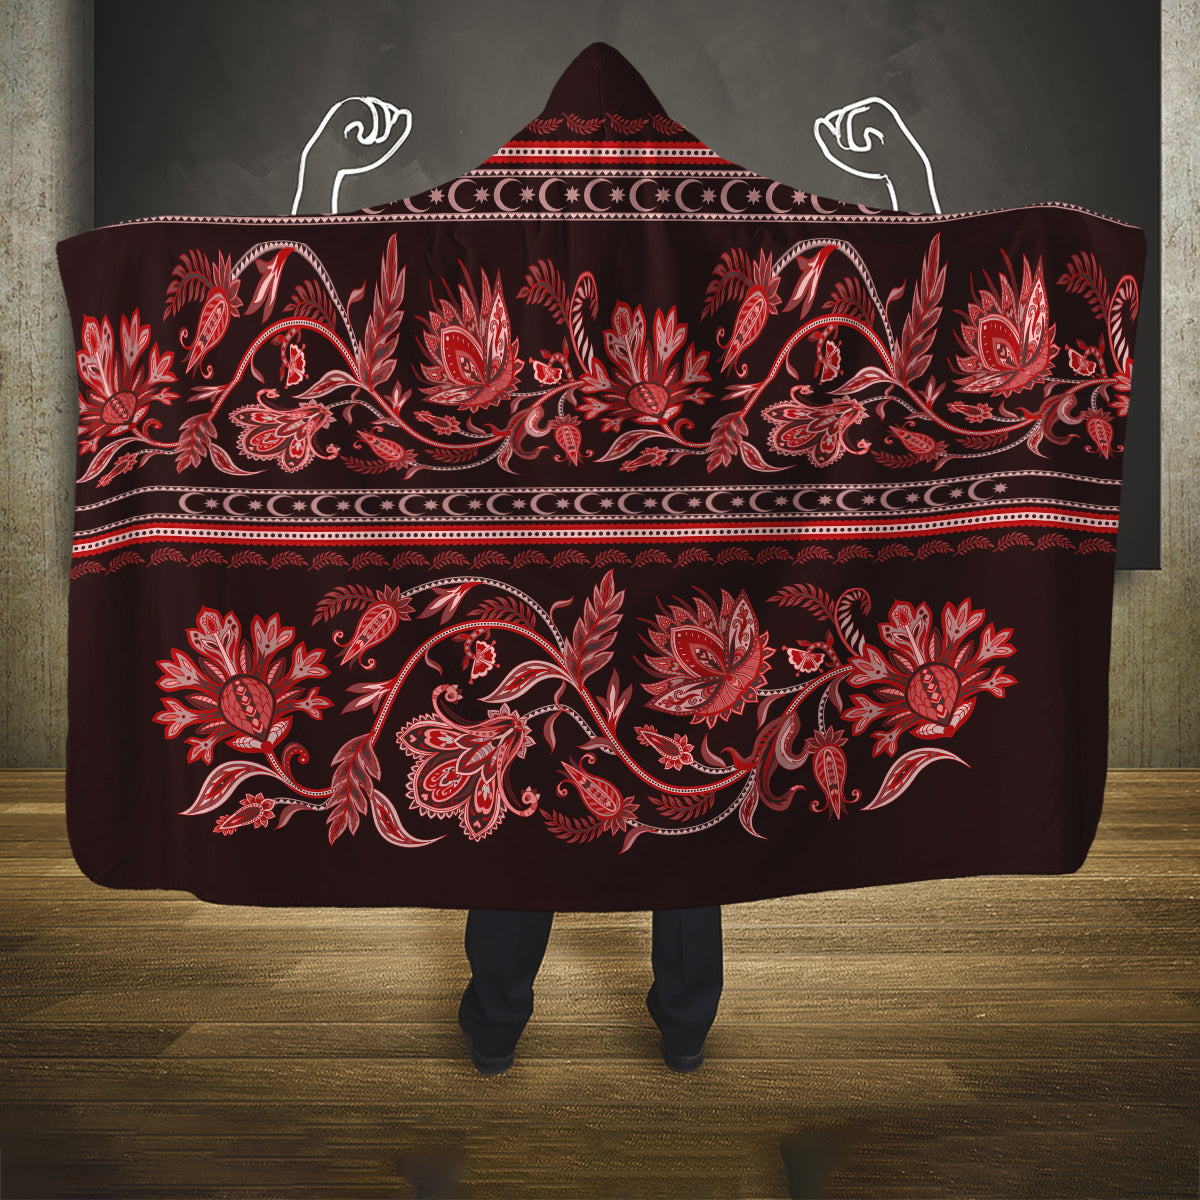 azerbaijan-hooded-blanket-traditional-pattern-ornament-with-flowers-buta-red